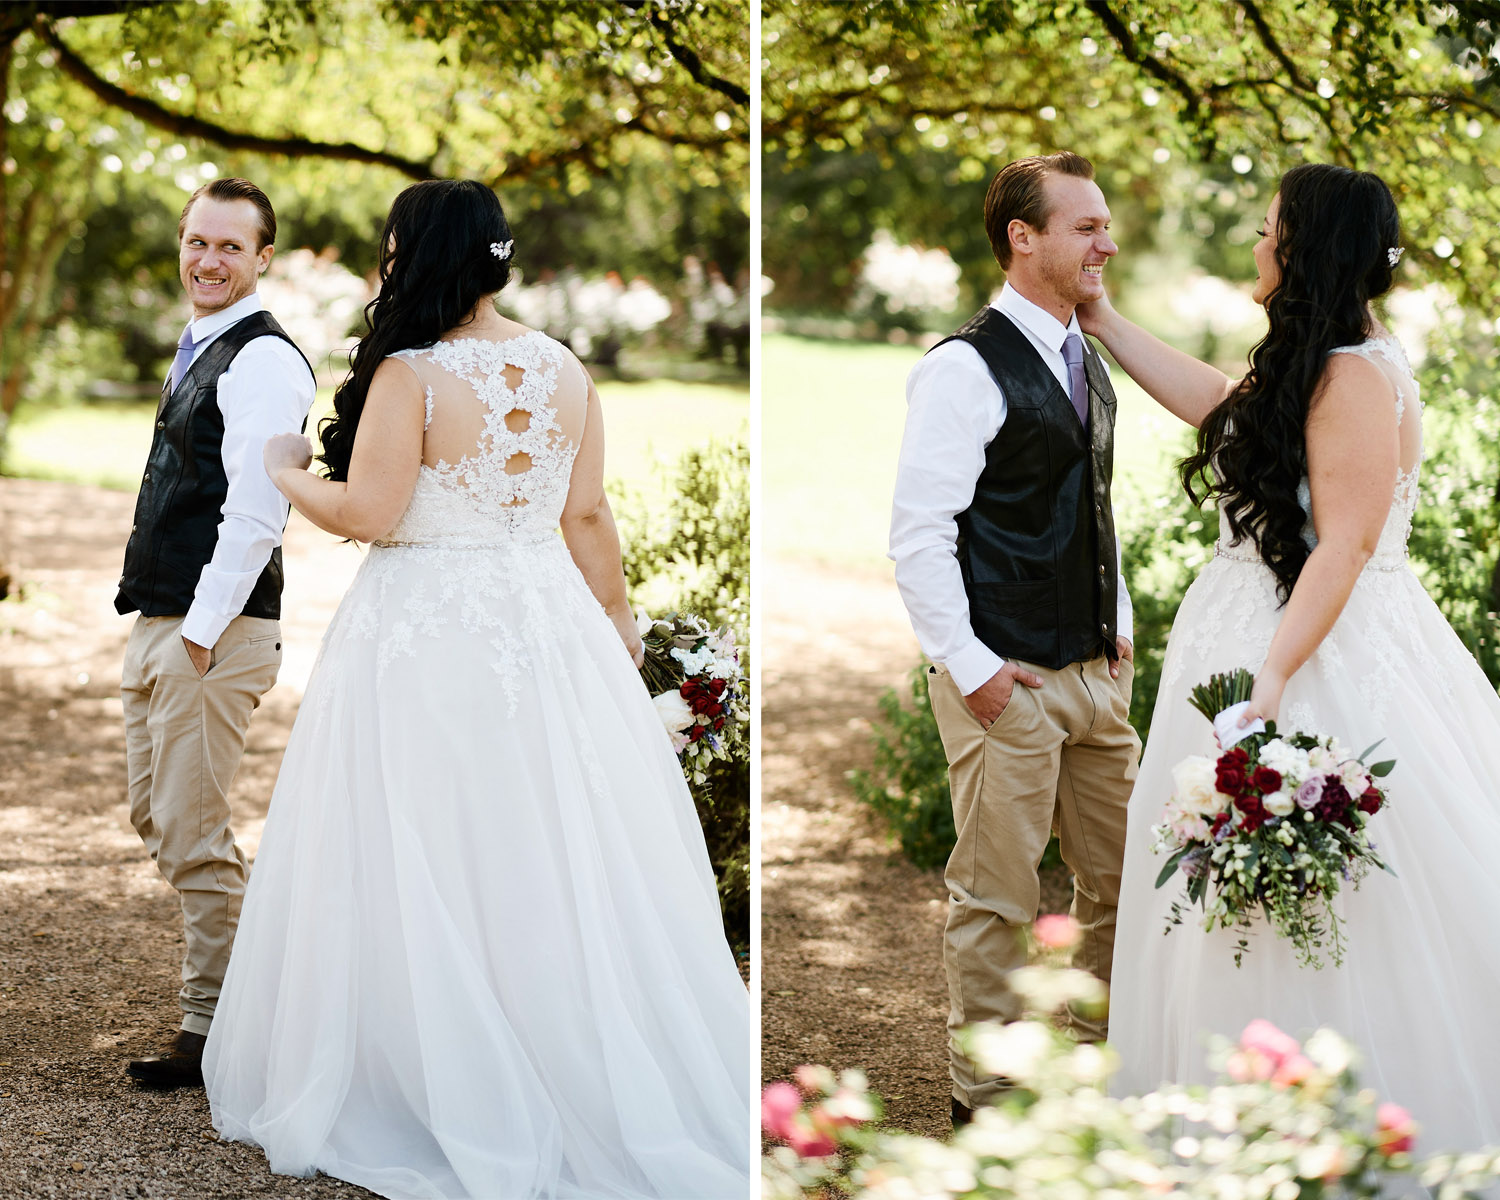 Robert was nervous until he laid eyes on Abby at their Wildflower Barn wedding. Taken by Mercedes Morgan Photography, Austin wedding photojournalists.